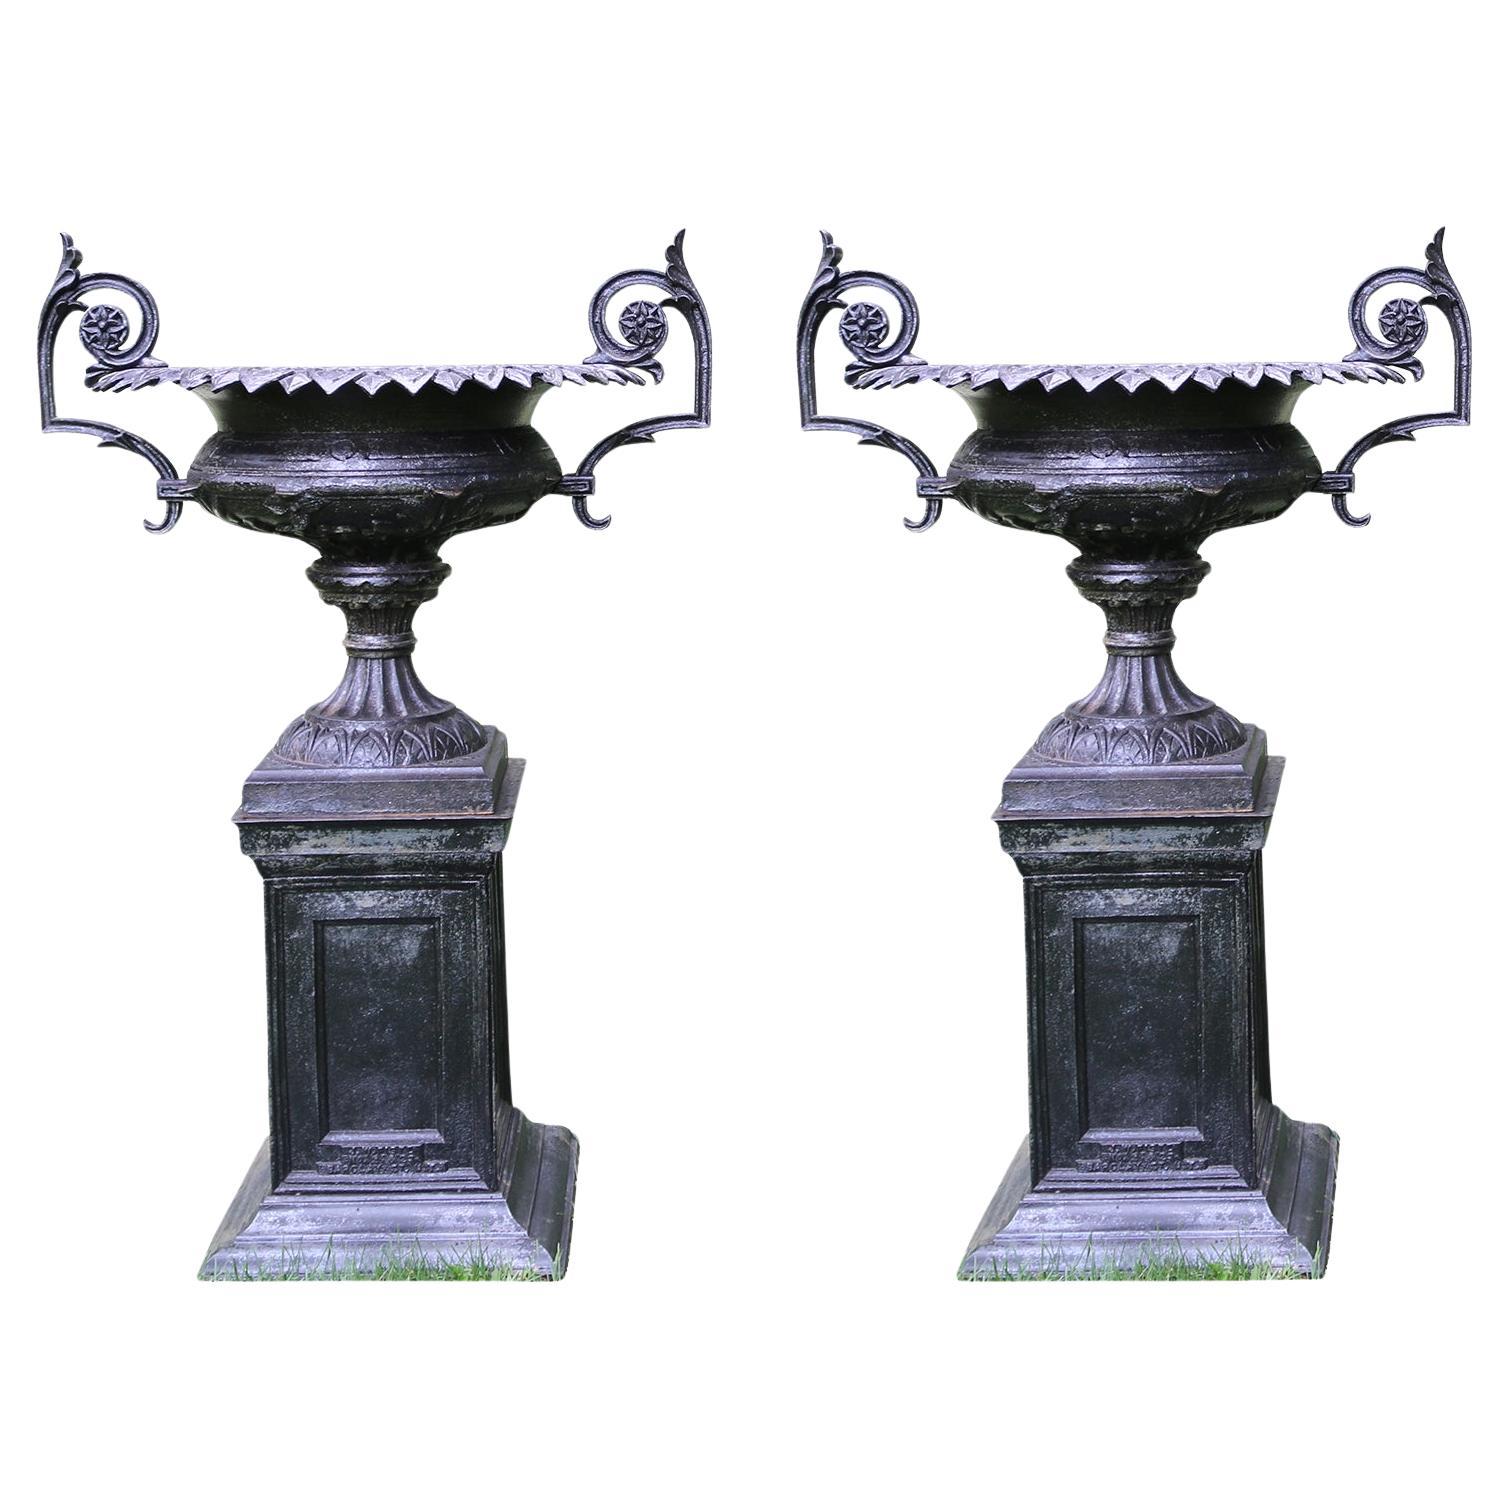 A Pair of Black Cast-Iron Urns by J.W. Fiske For Sale